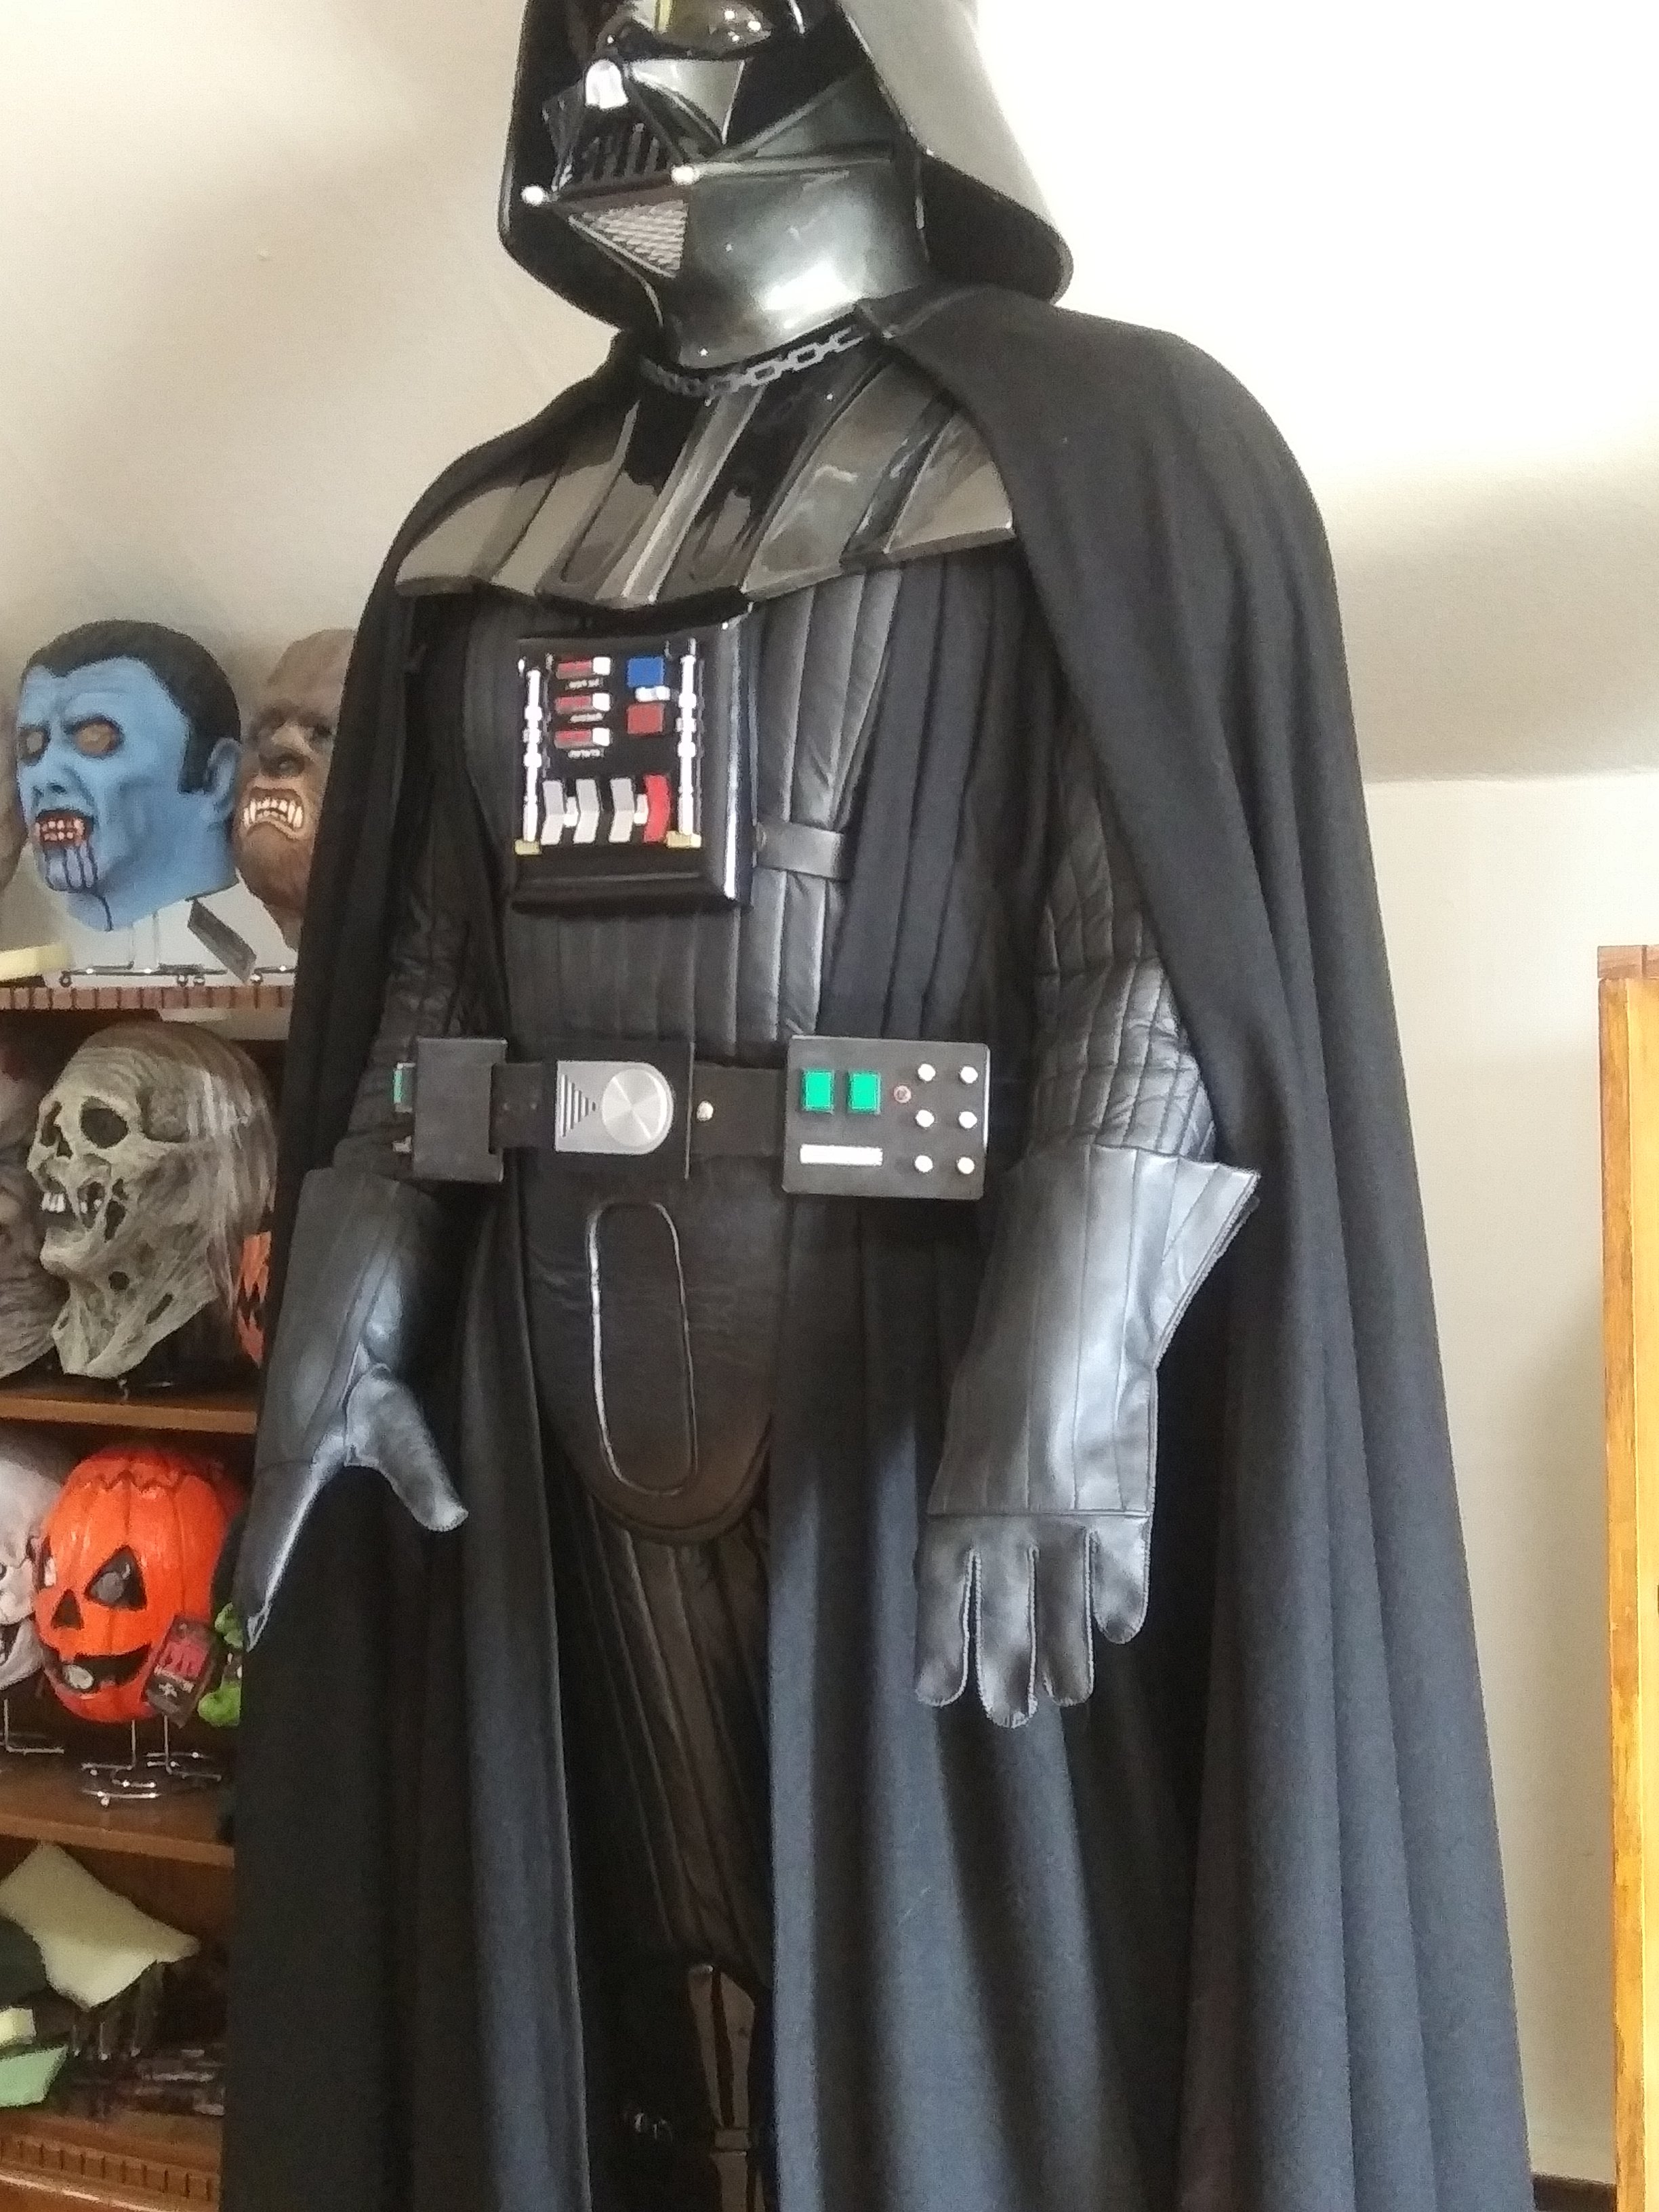 Screen Accurate Return Of The Jedi Darth Vader Costume Page 3 Rpf Costume And Prop Maker Community